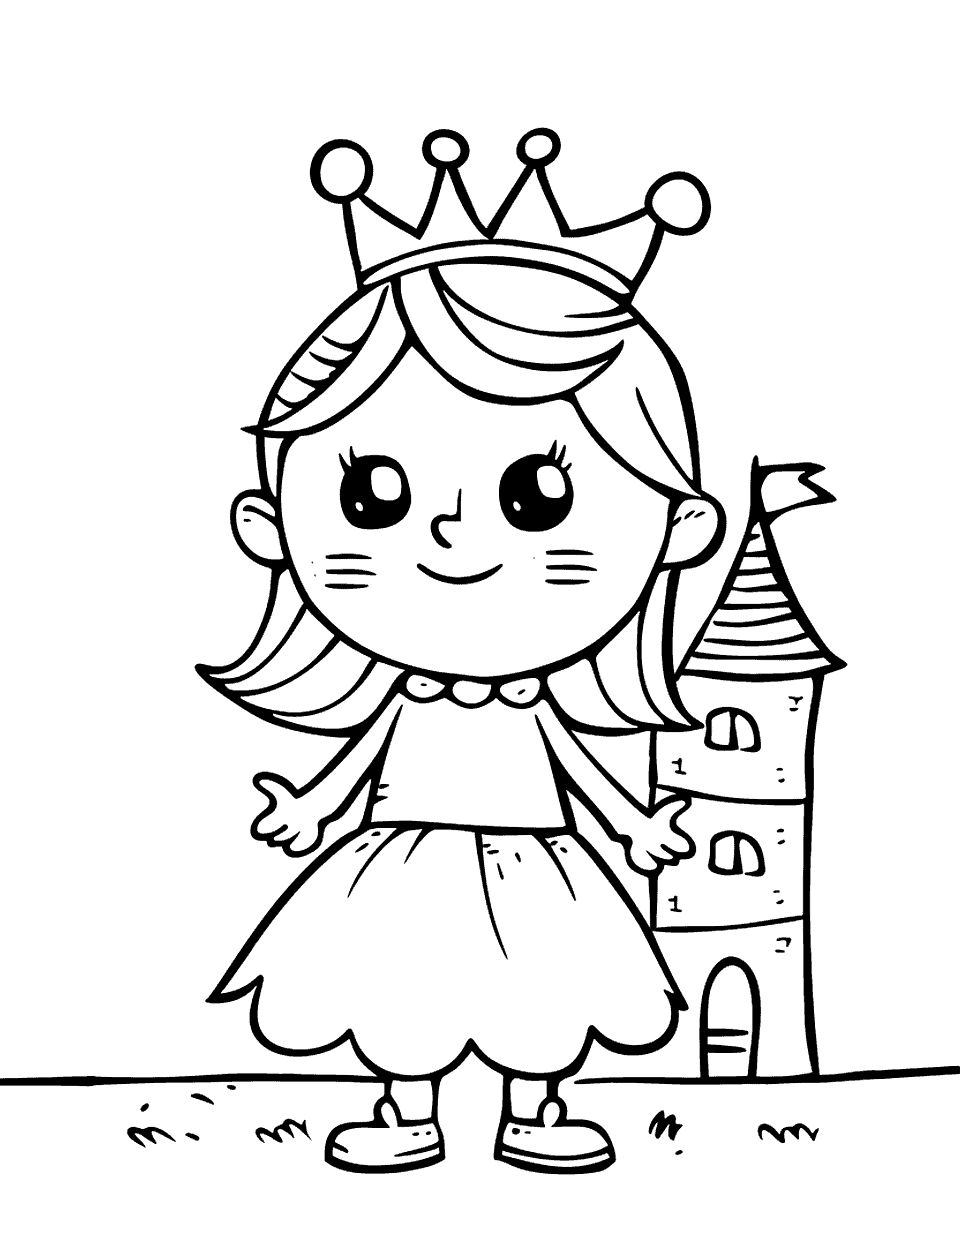 Princess Castle Toddler Coloring Page - A smiling princess standing in front of a small, simple castle.